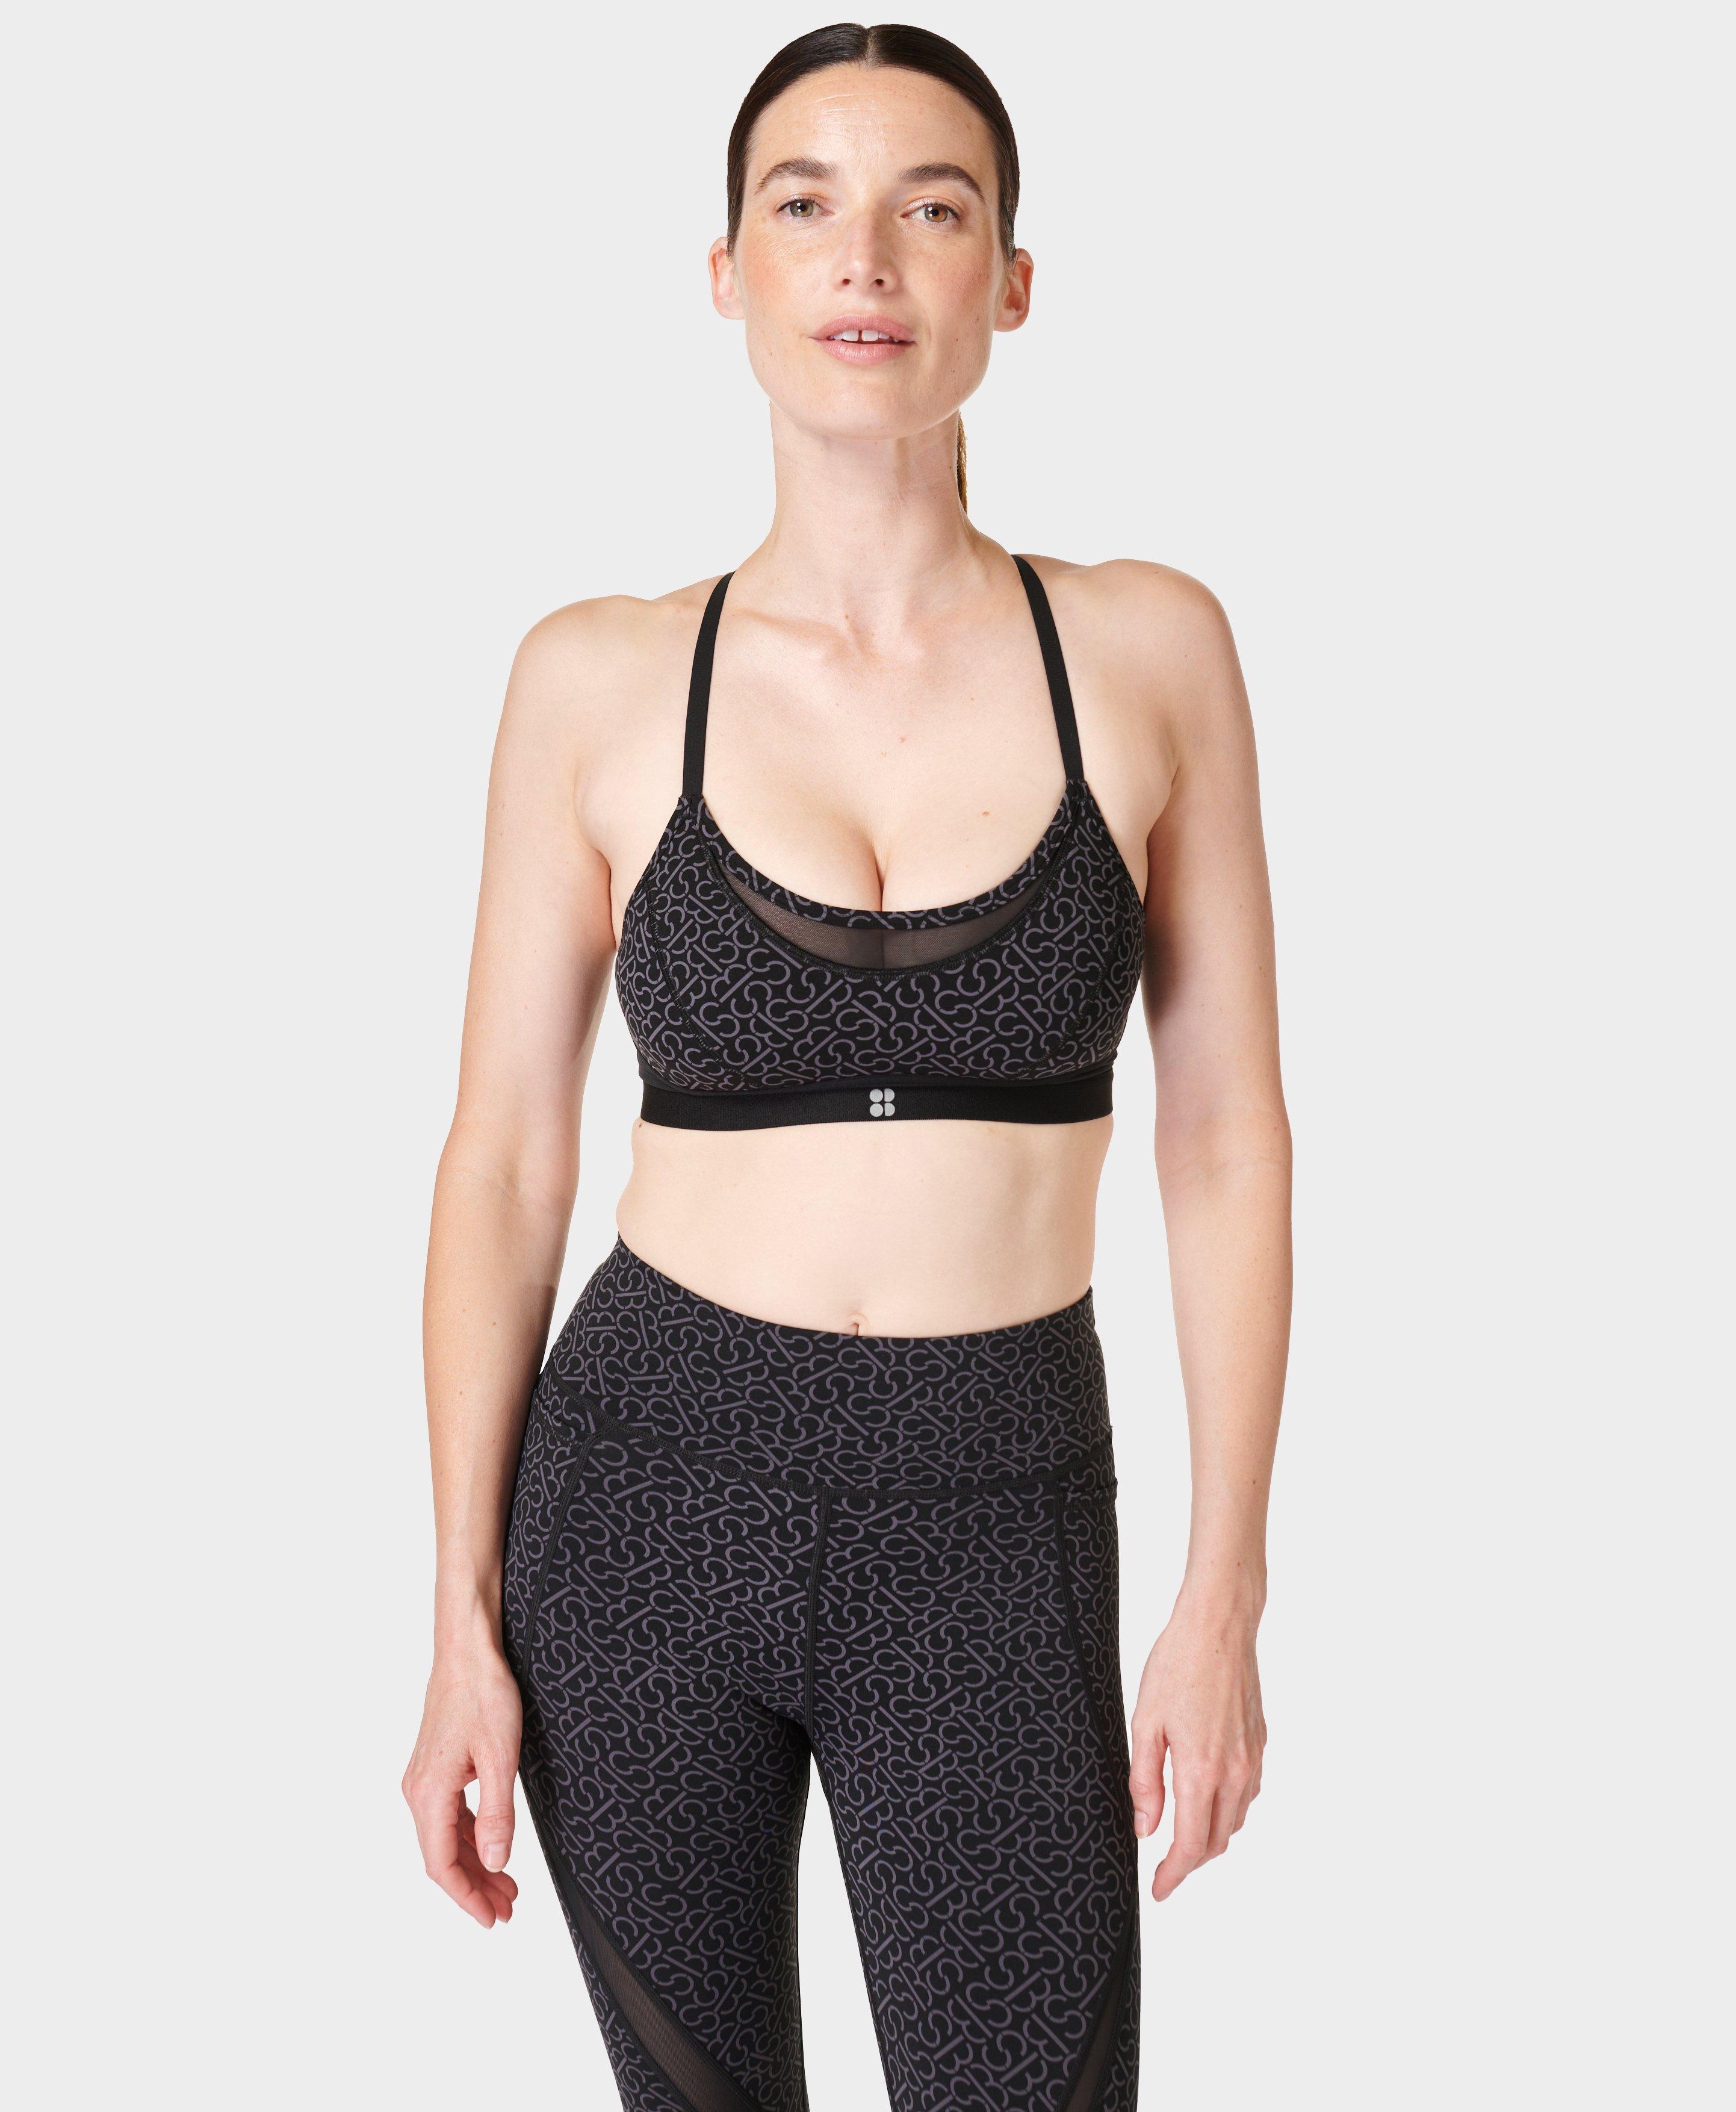 Powerhouse Collection - Utility bra by Sandre